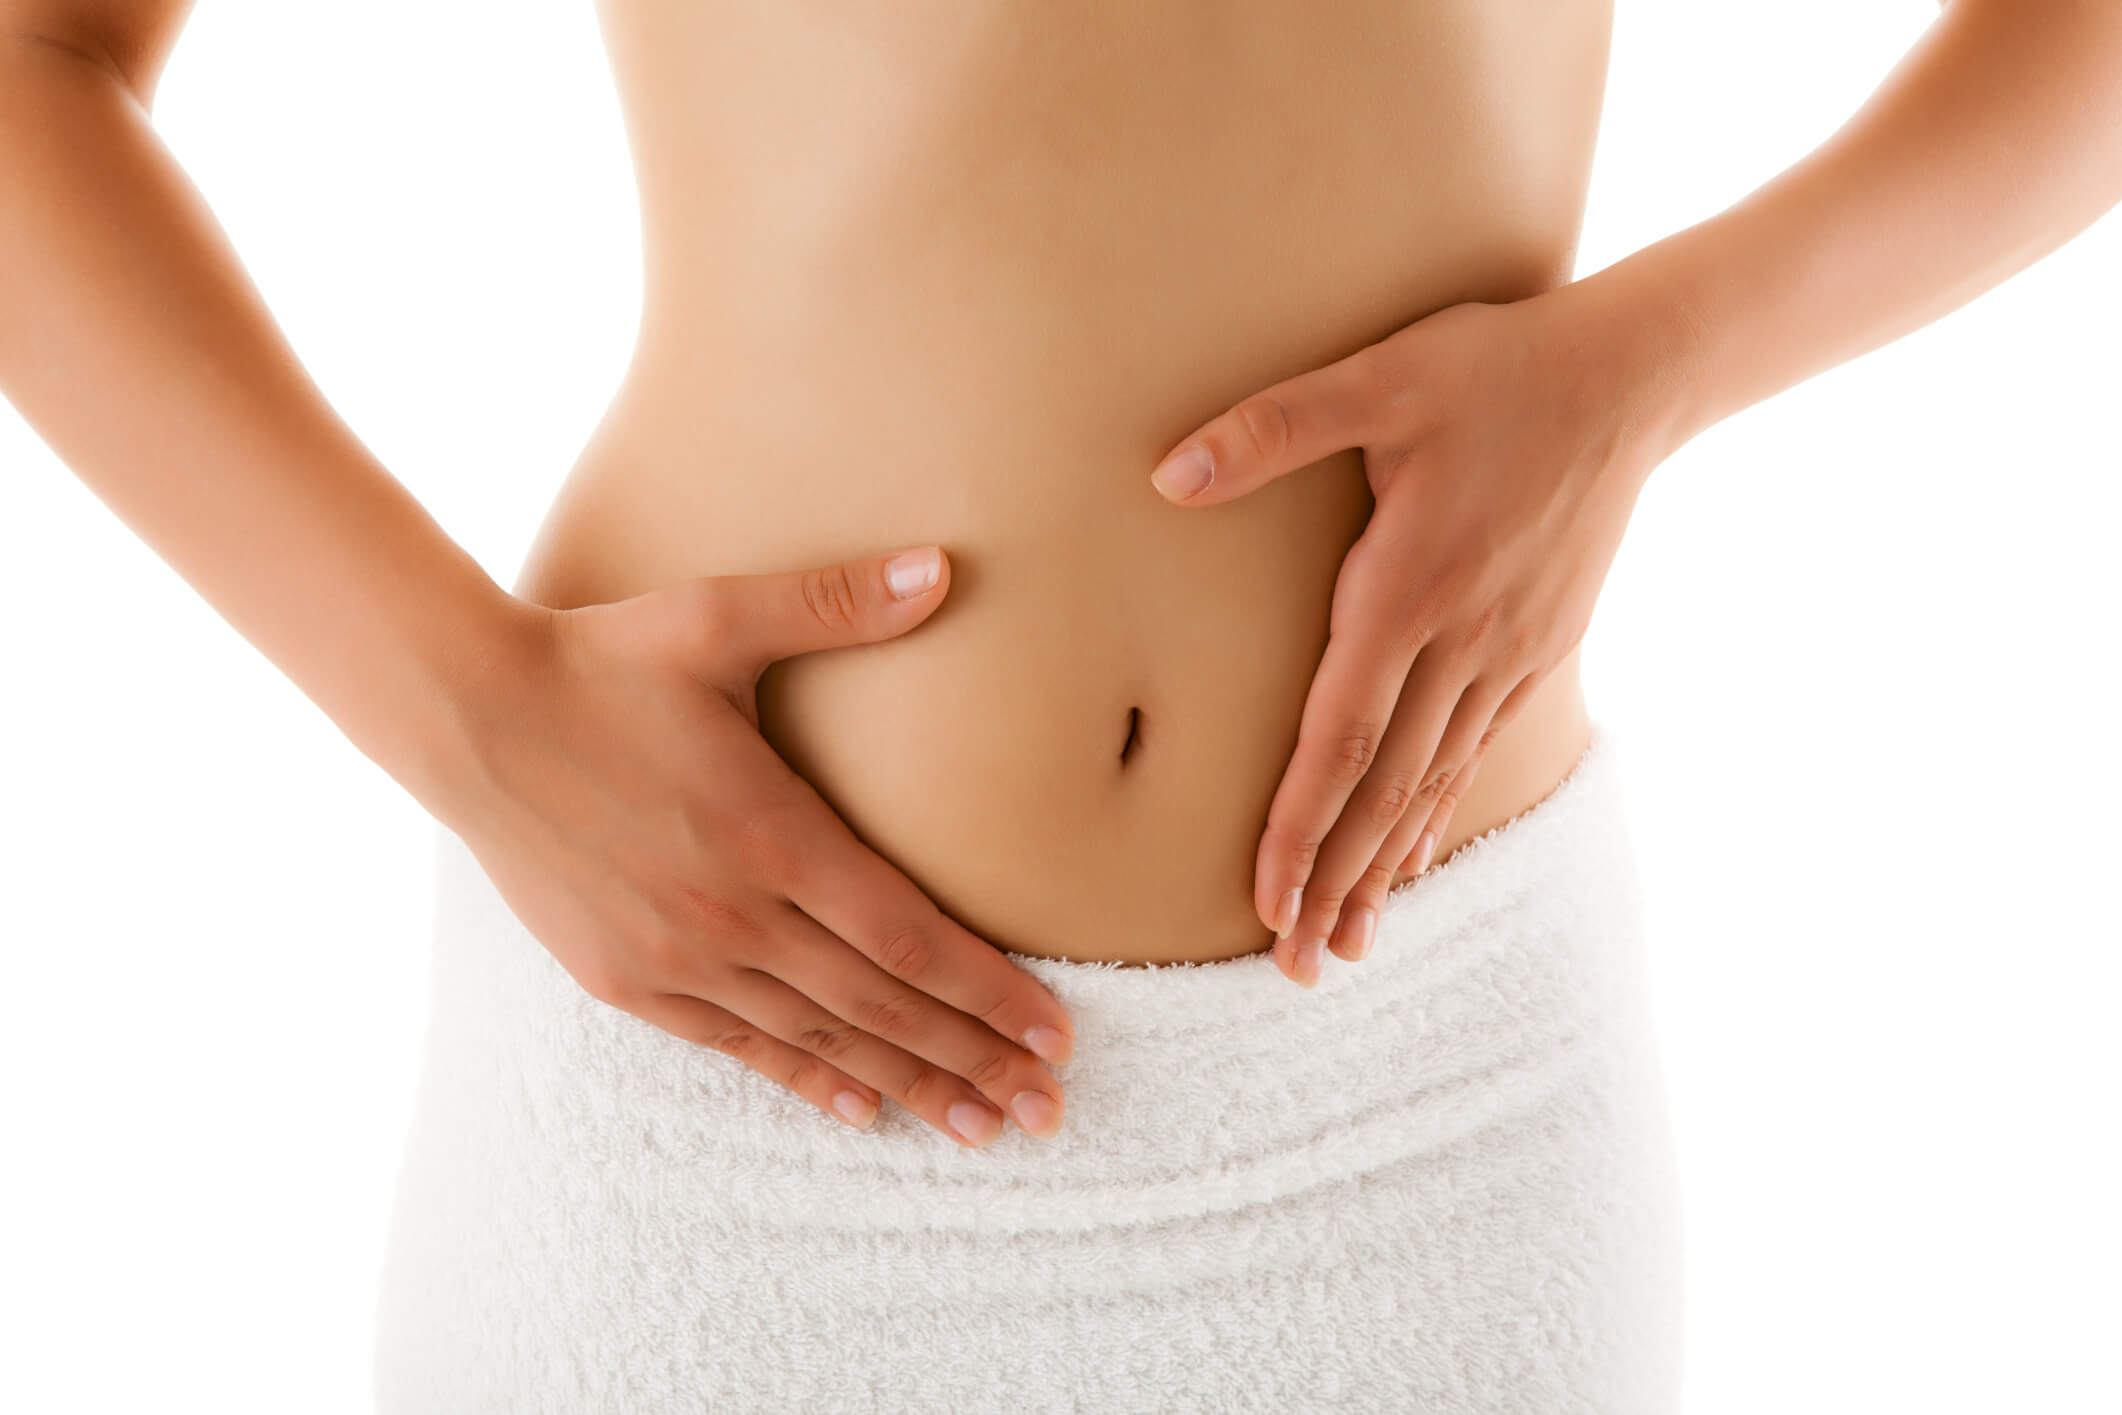 What If You’re Not a Good Tummy Tuck Candidate?